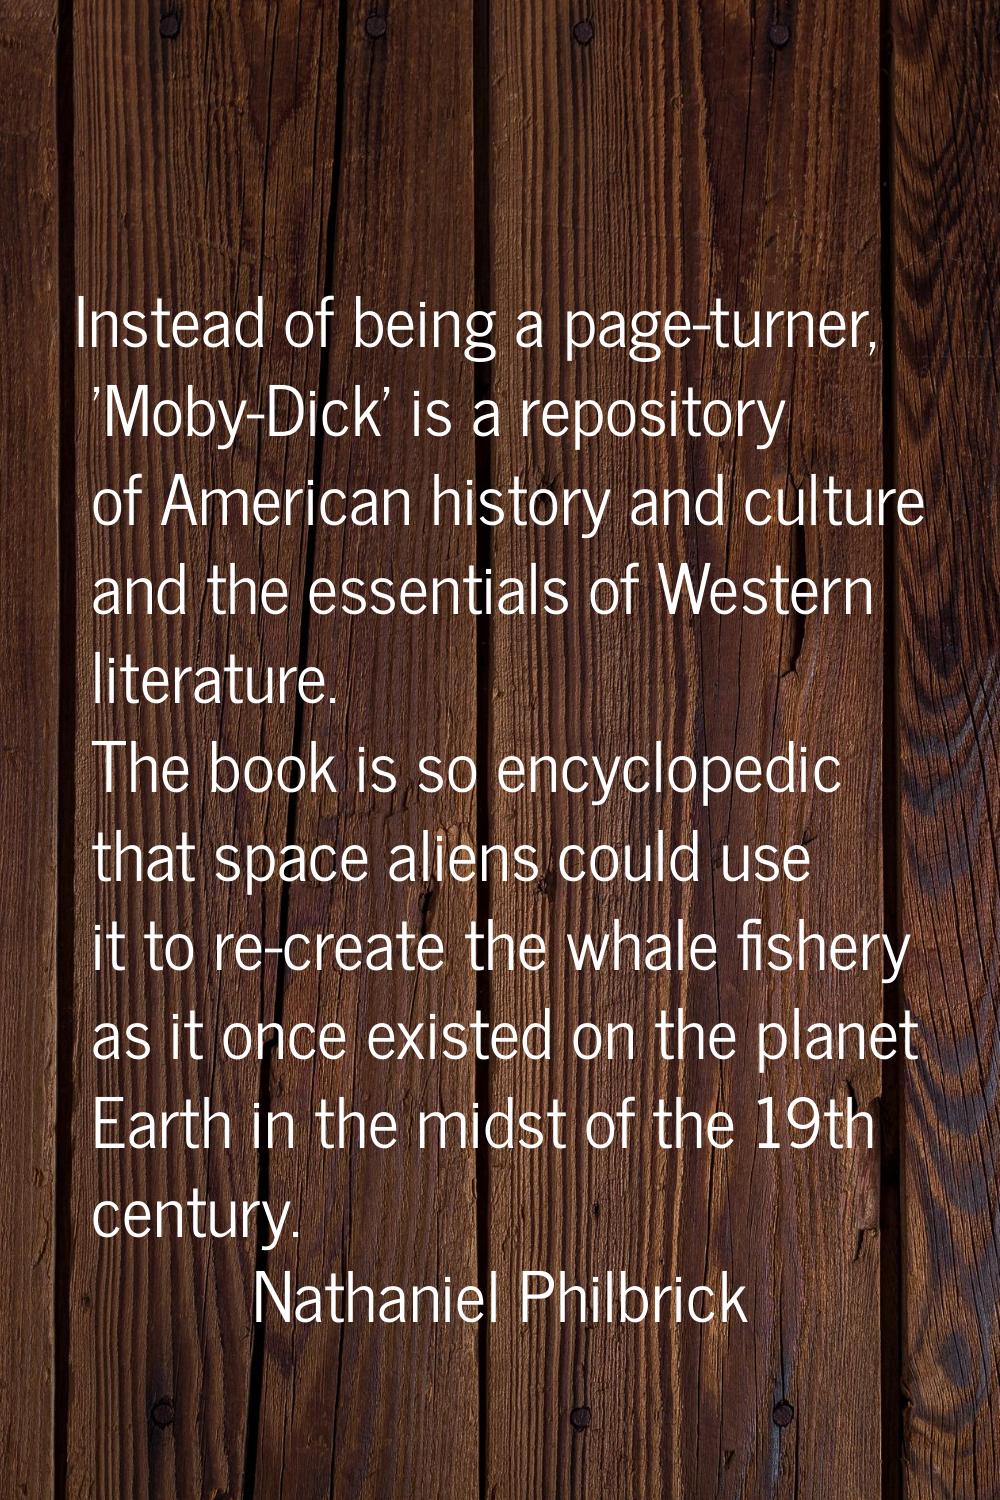 Instead of being a page-turner, 'Moby-Dick' is a repository of American history and culture and the